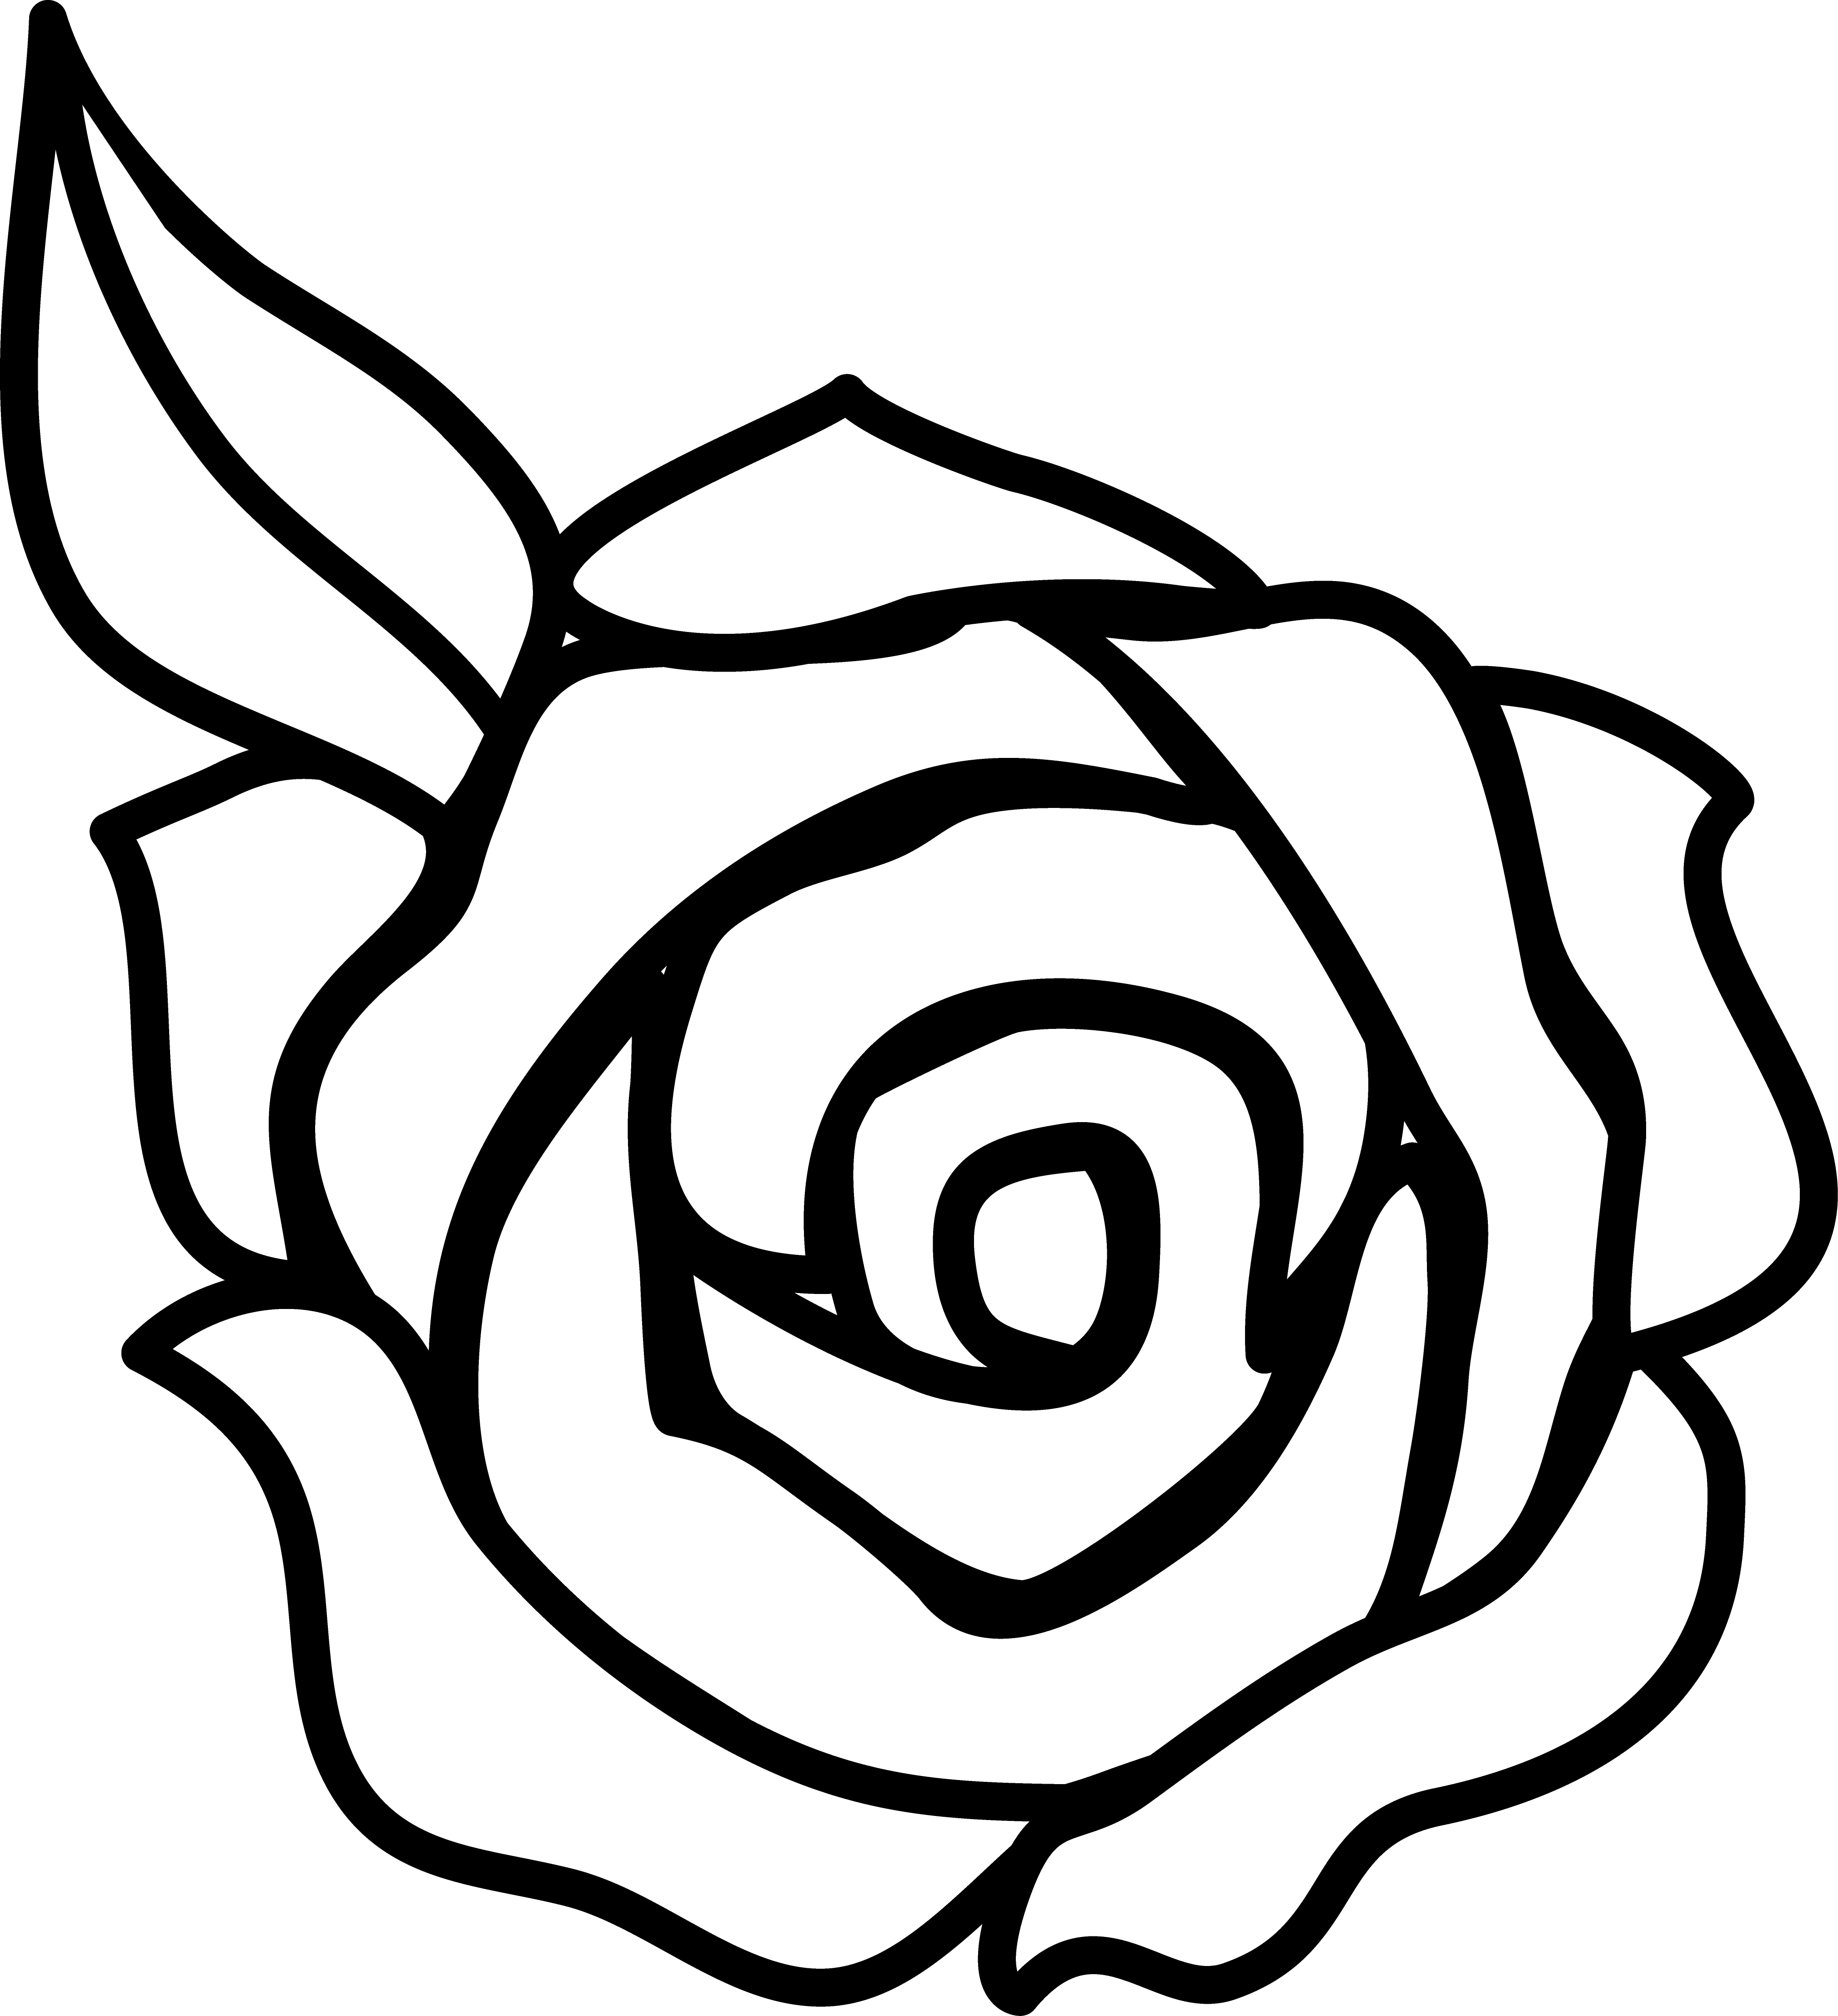 How to draw a rose clipart